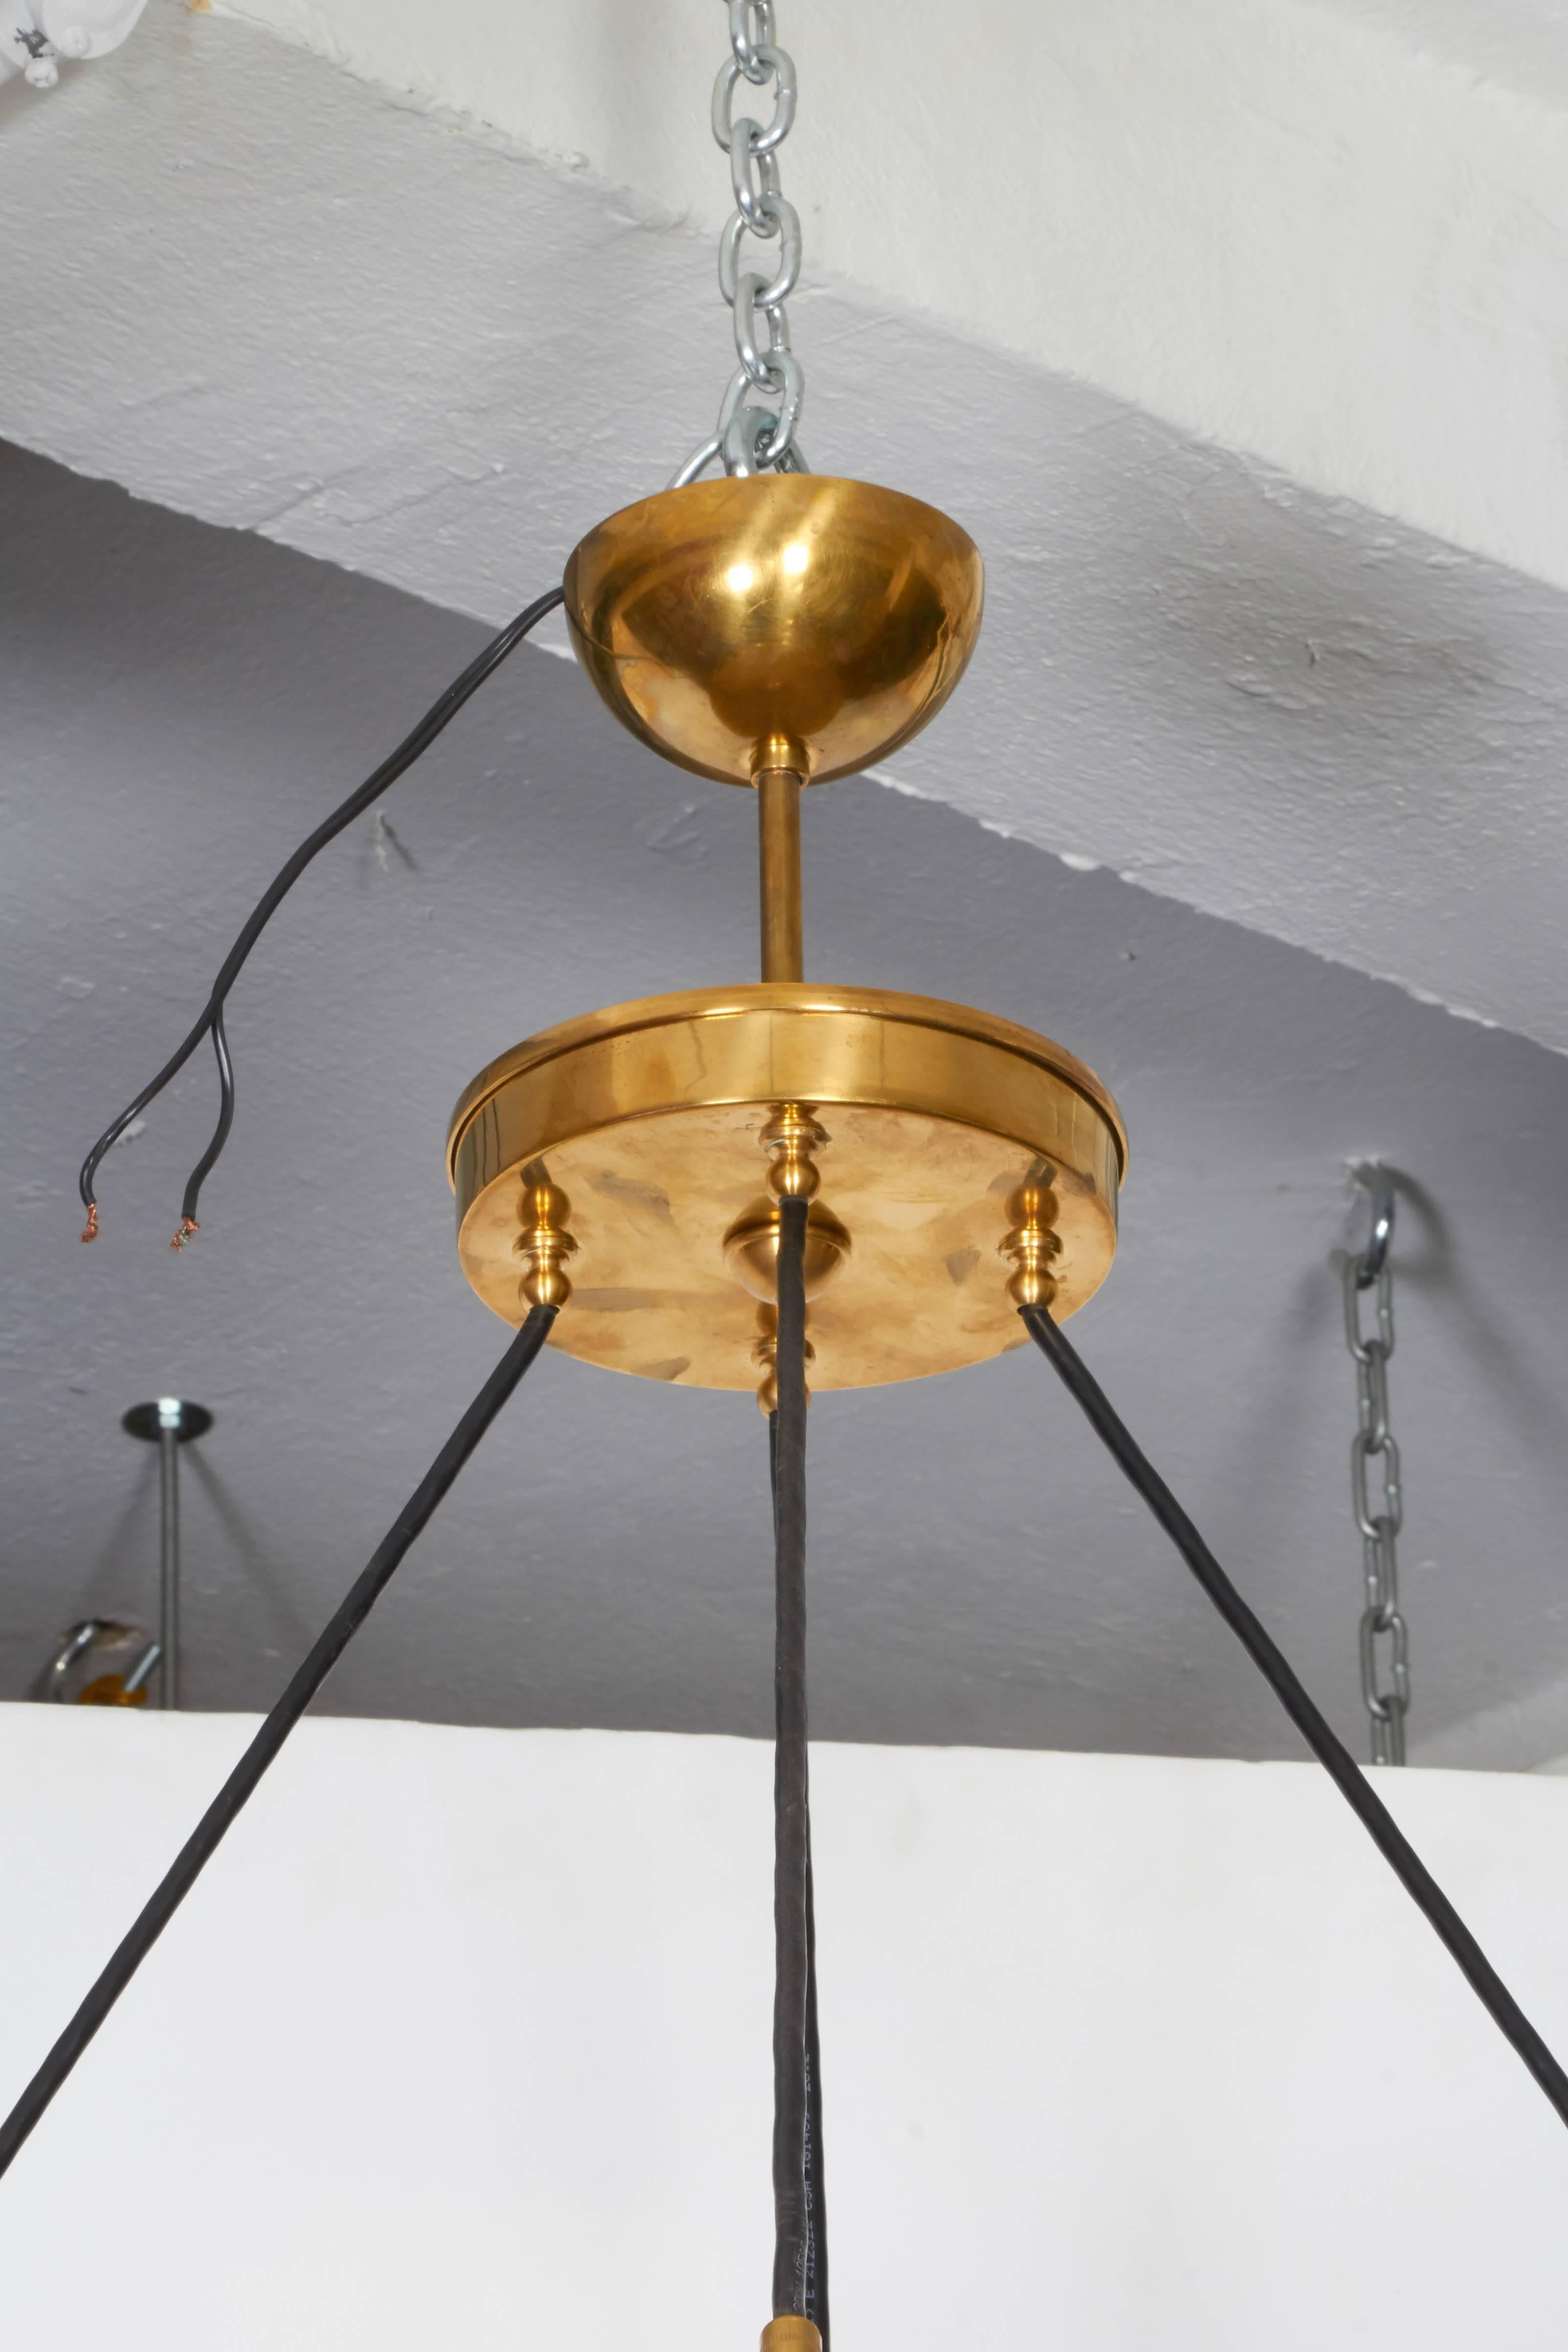 An Italian chandelier, manufactured, circa 1960s, featuring nine hanging lights with surrounding amber globes in handblown Murano glass, suspended from a ring form brass frame. Requires nine candelabra base bulbs. This fixture remains in excellent